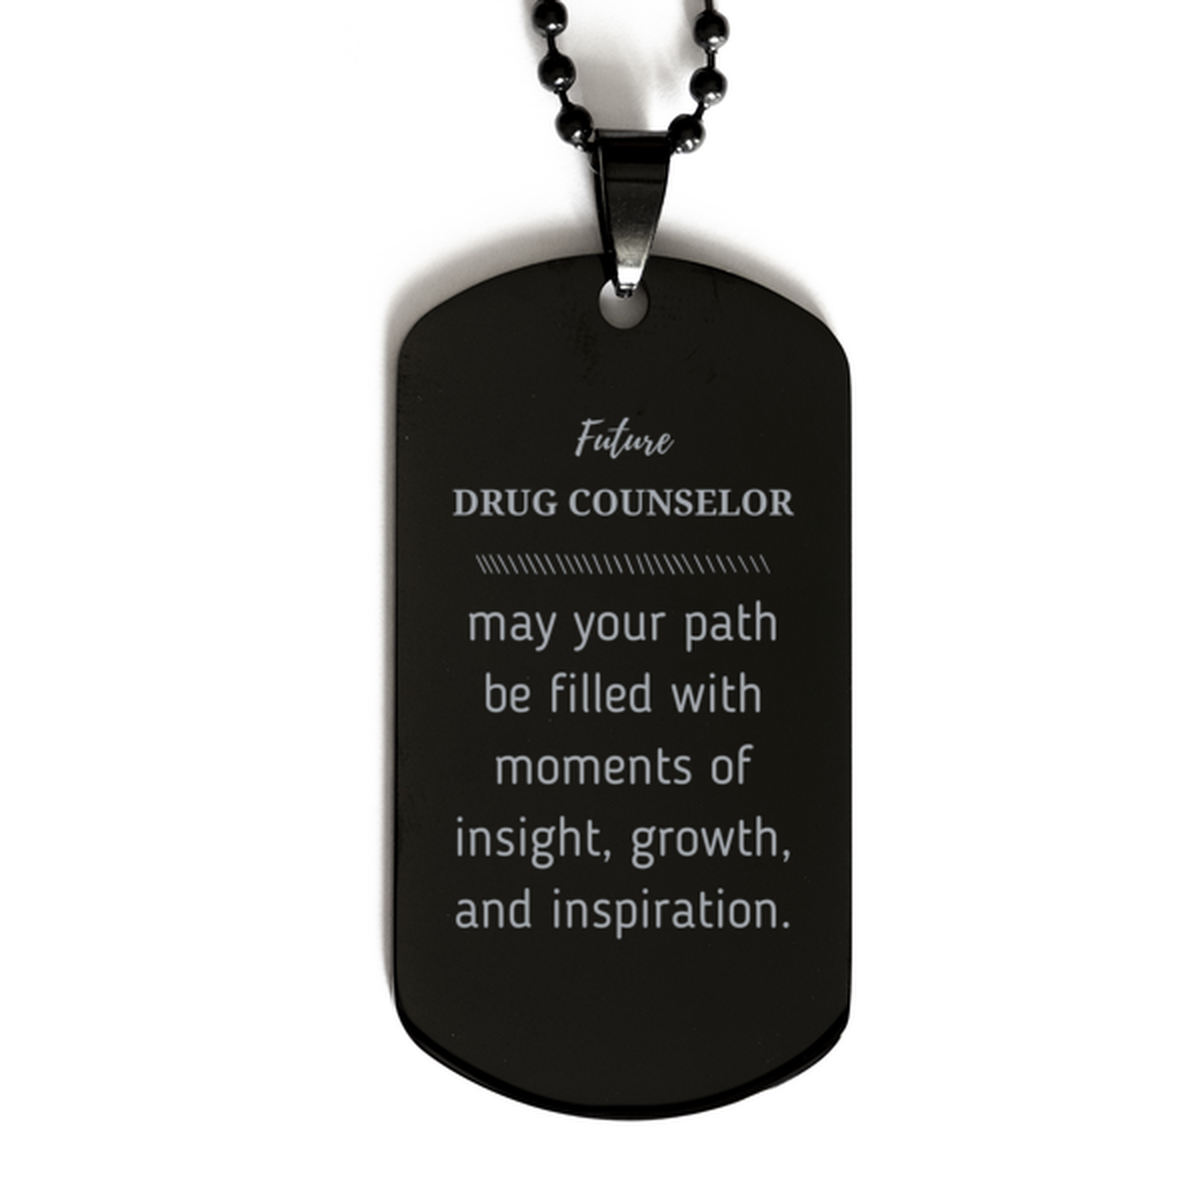 Future Drug Counselor Gifts, May your path be filled with moments of insight, Graduation Gifts for New Drug Counselor, Christmas Unique Black Dog Tag For Men, Women, Friends